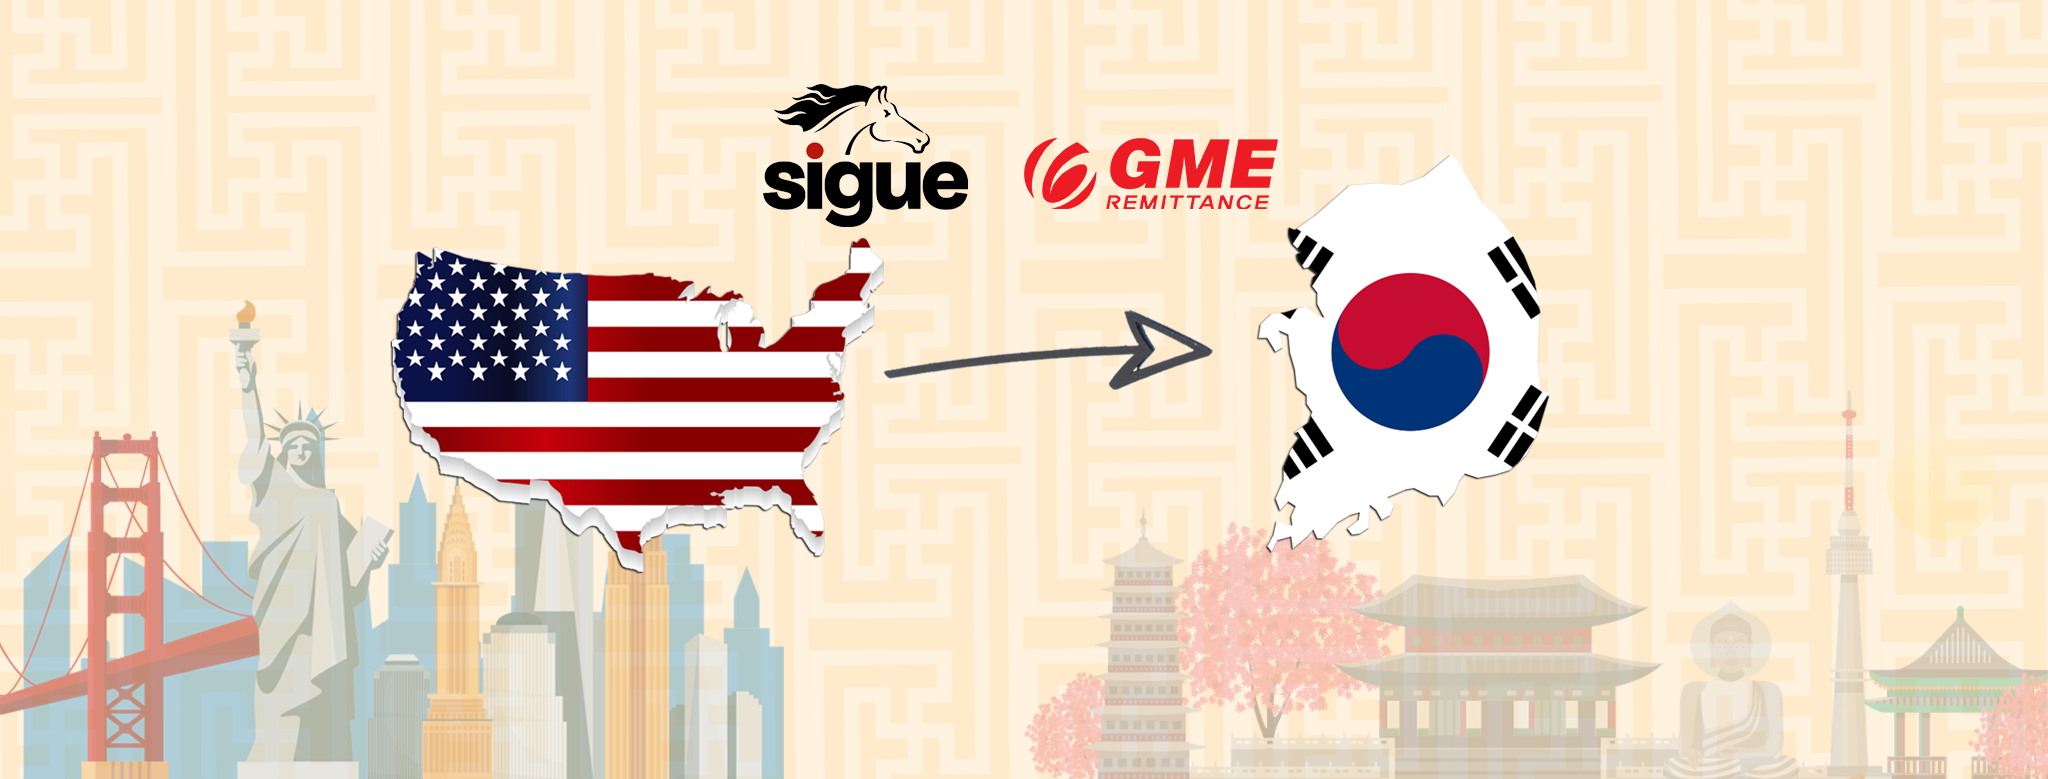 Receive funds from US is easier by GME-Sigue Partnership